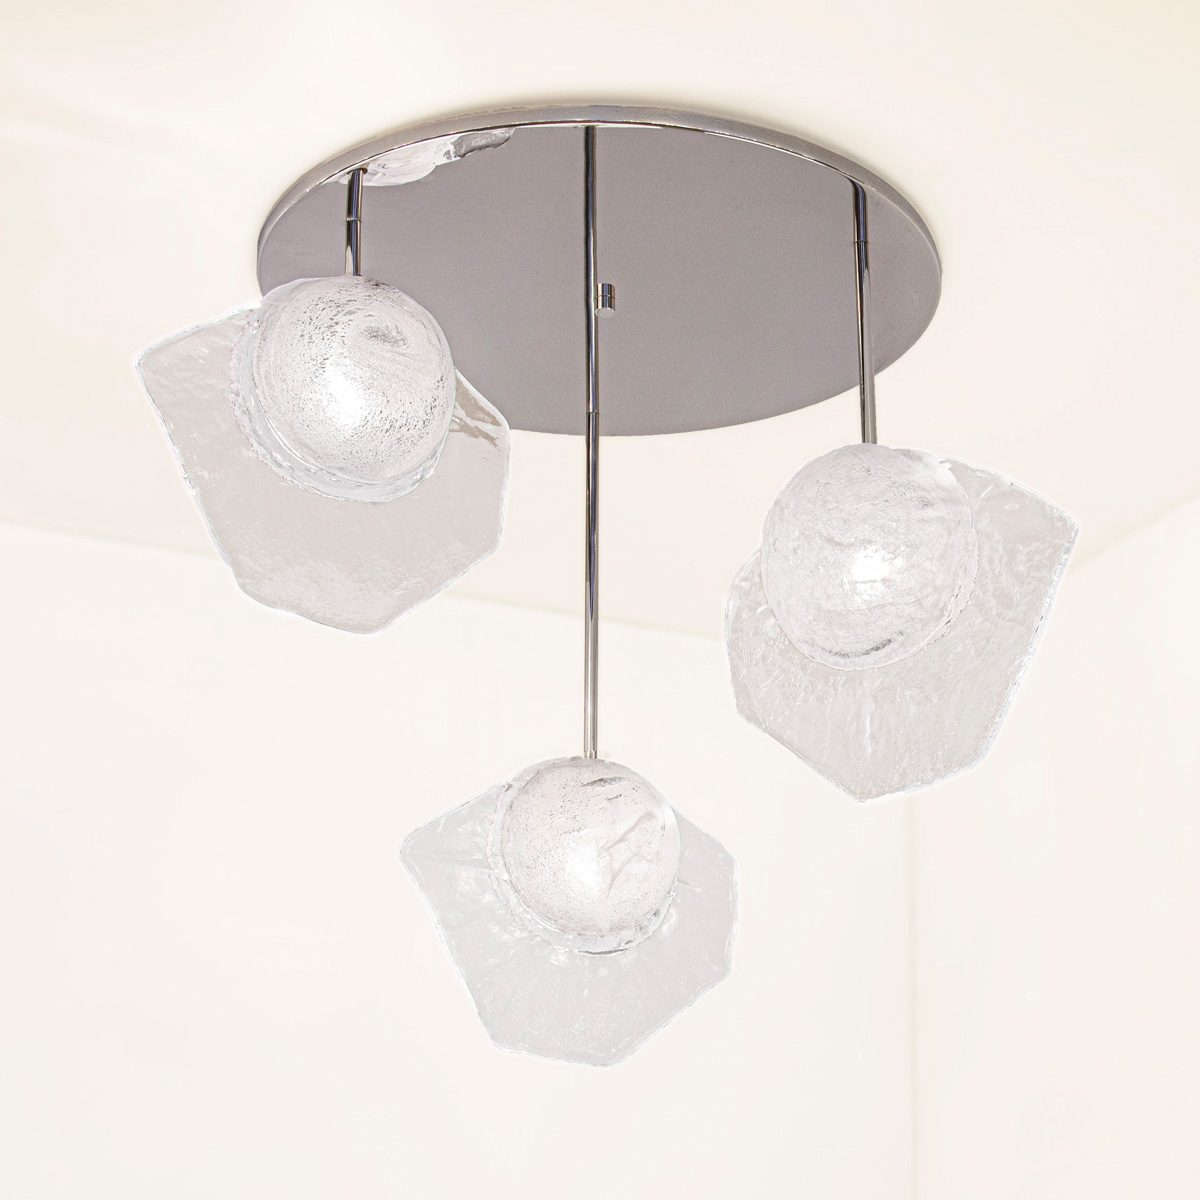 Vento ceiling light by gaspare asaro